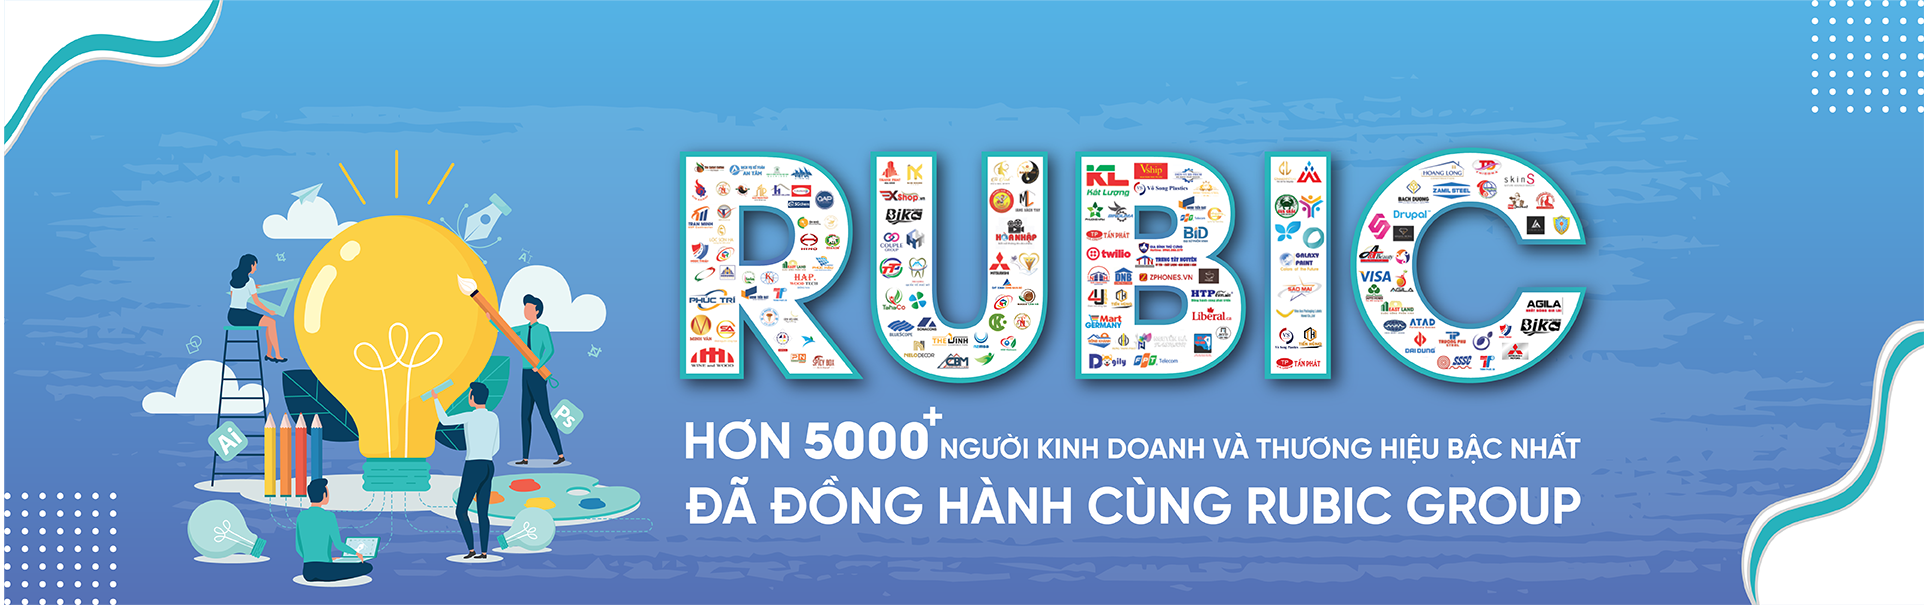 banner-rubicgroup-t6.png